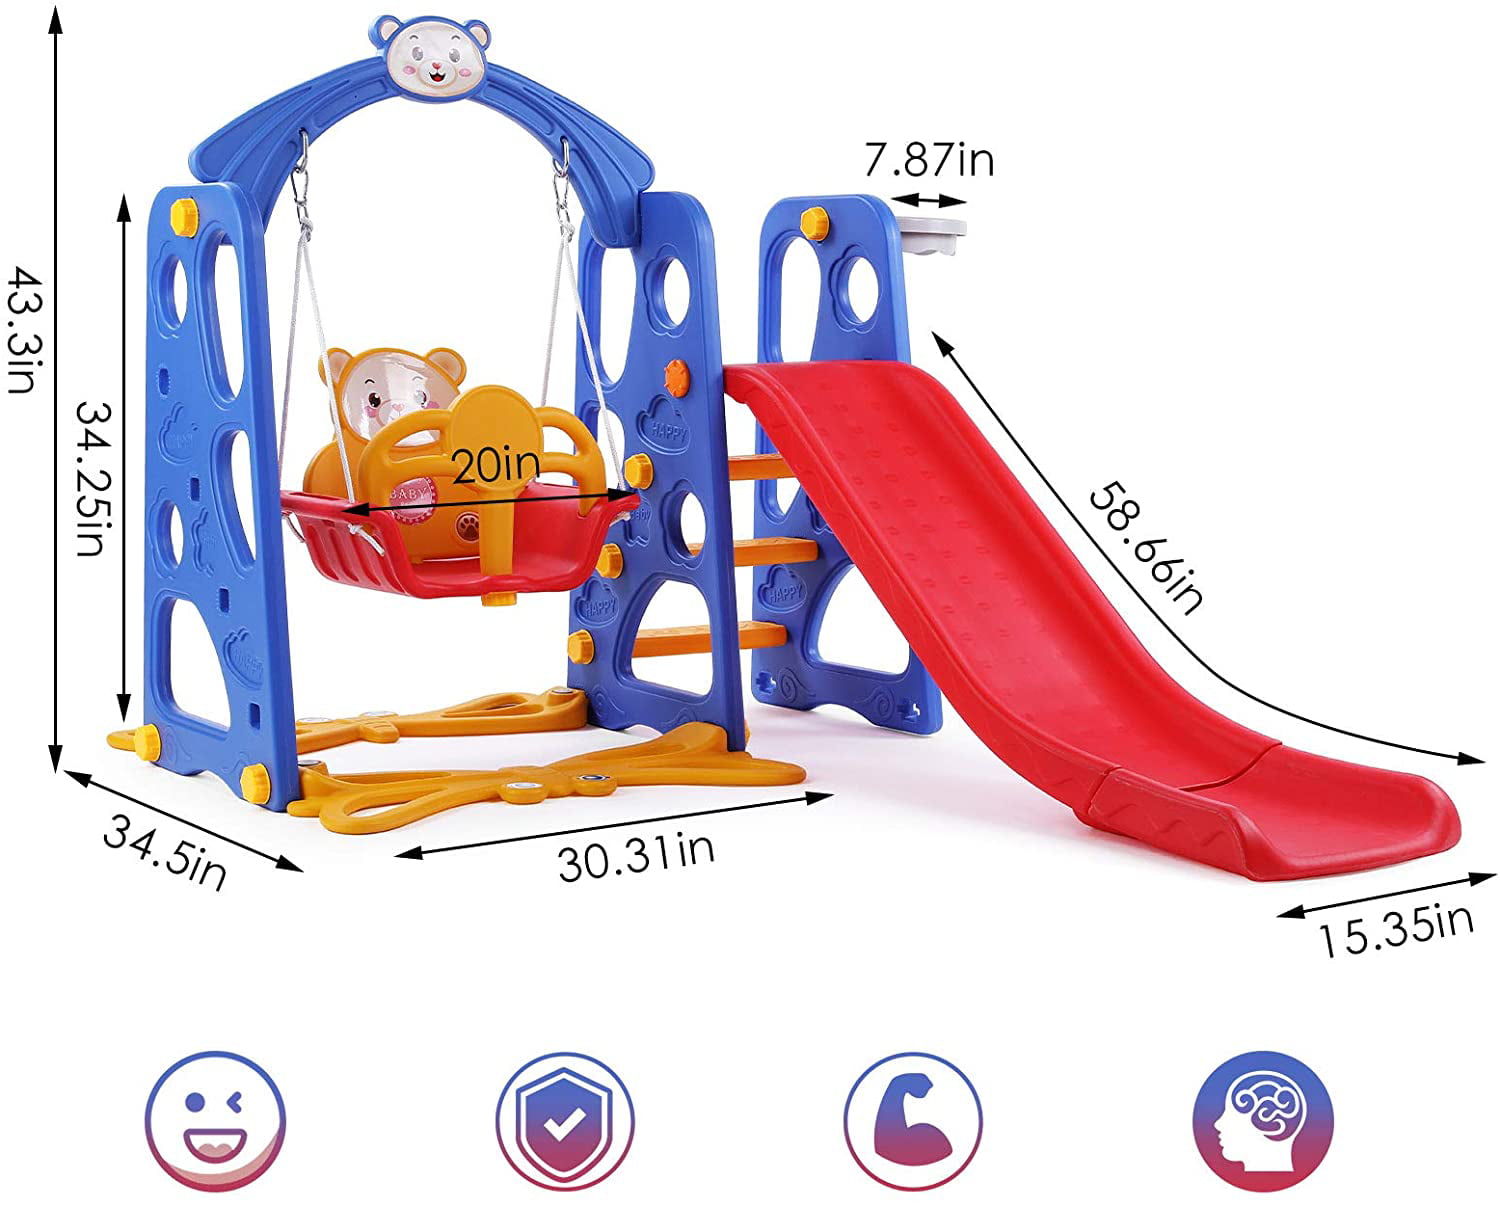 Toddler Climber and Swing Set Stock in UK Kids Playset with Music Machine and Shoot Blue Kids Freestanding Climber Playground Children Activity Center for Indoor & Backyard